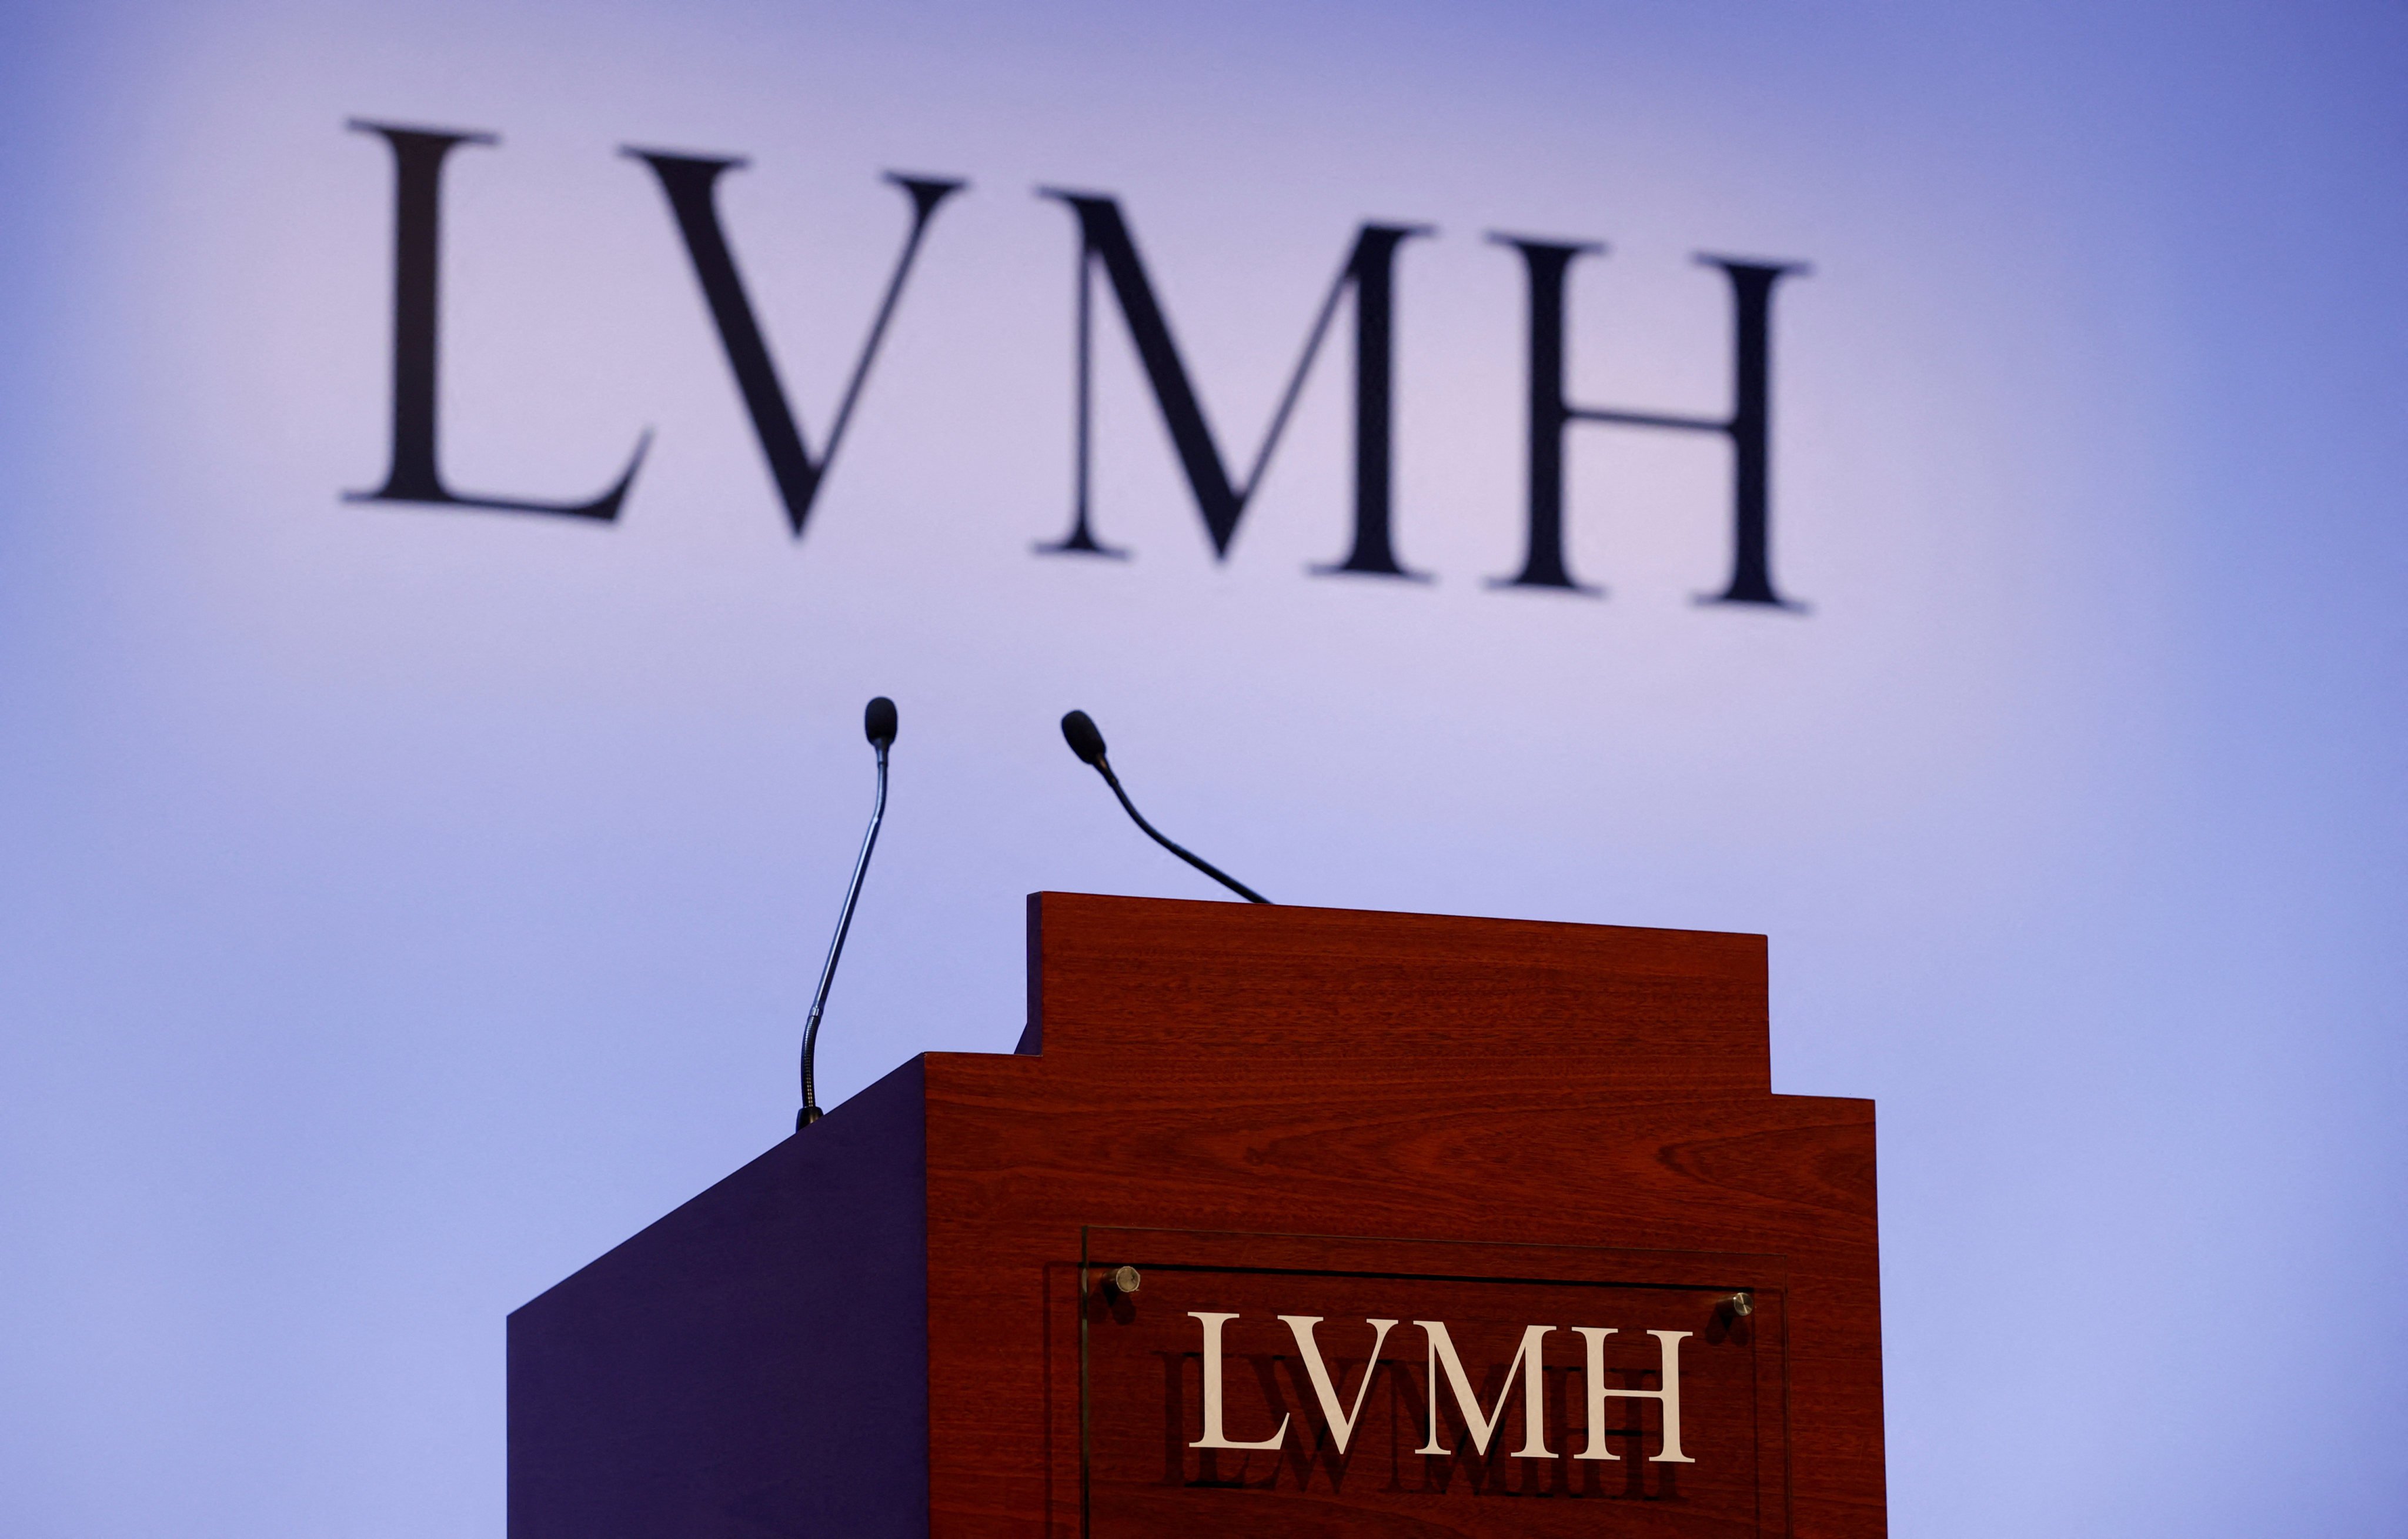 How did LVMH's market value exceed US$500 billion? Bernard Arnault built  the French luxury company into a global powerhouse but it was decades in  the making, owning brands from Louis Vuitton to